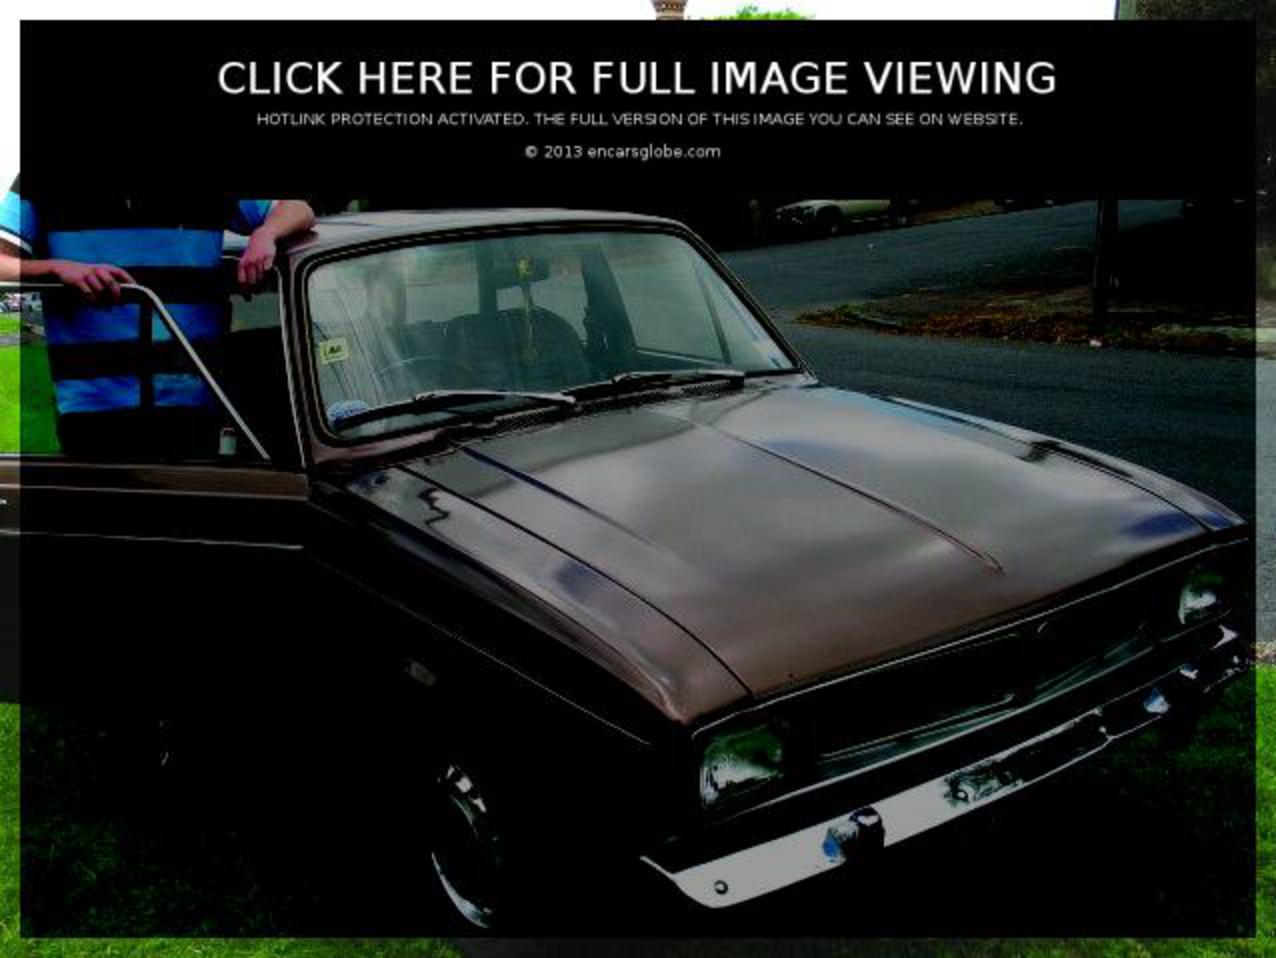 Hillman Hunter Wagon: Photo gallery, complete information about ...